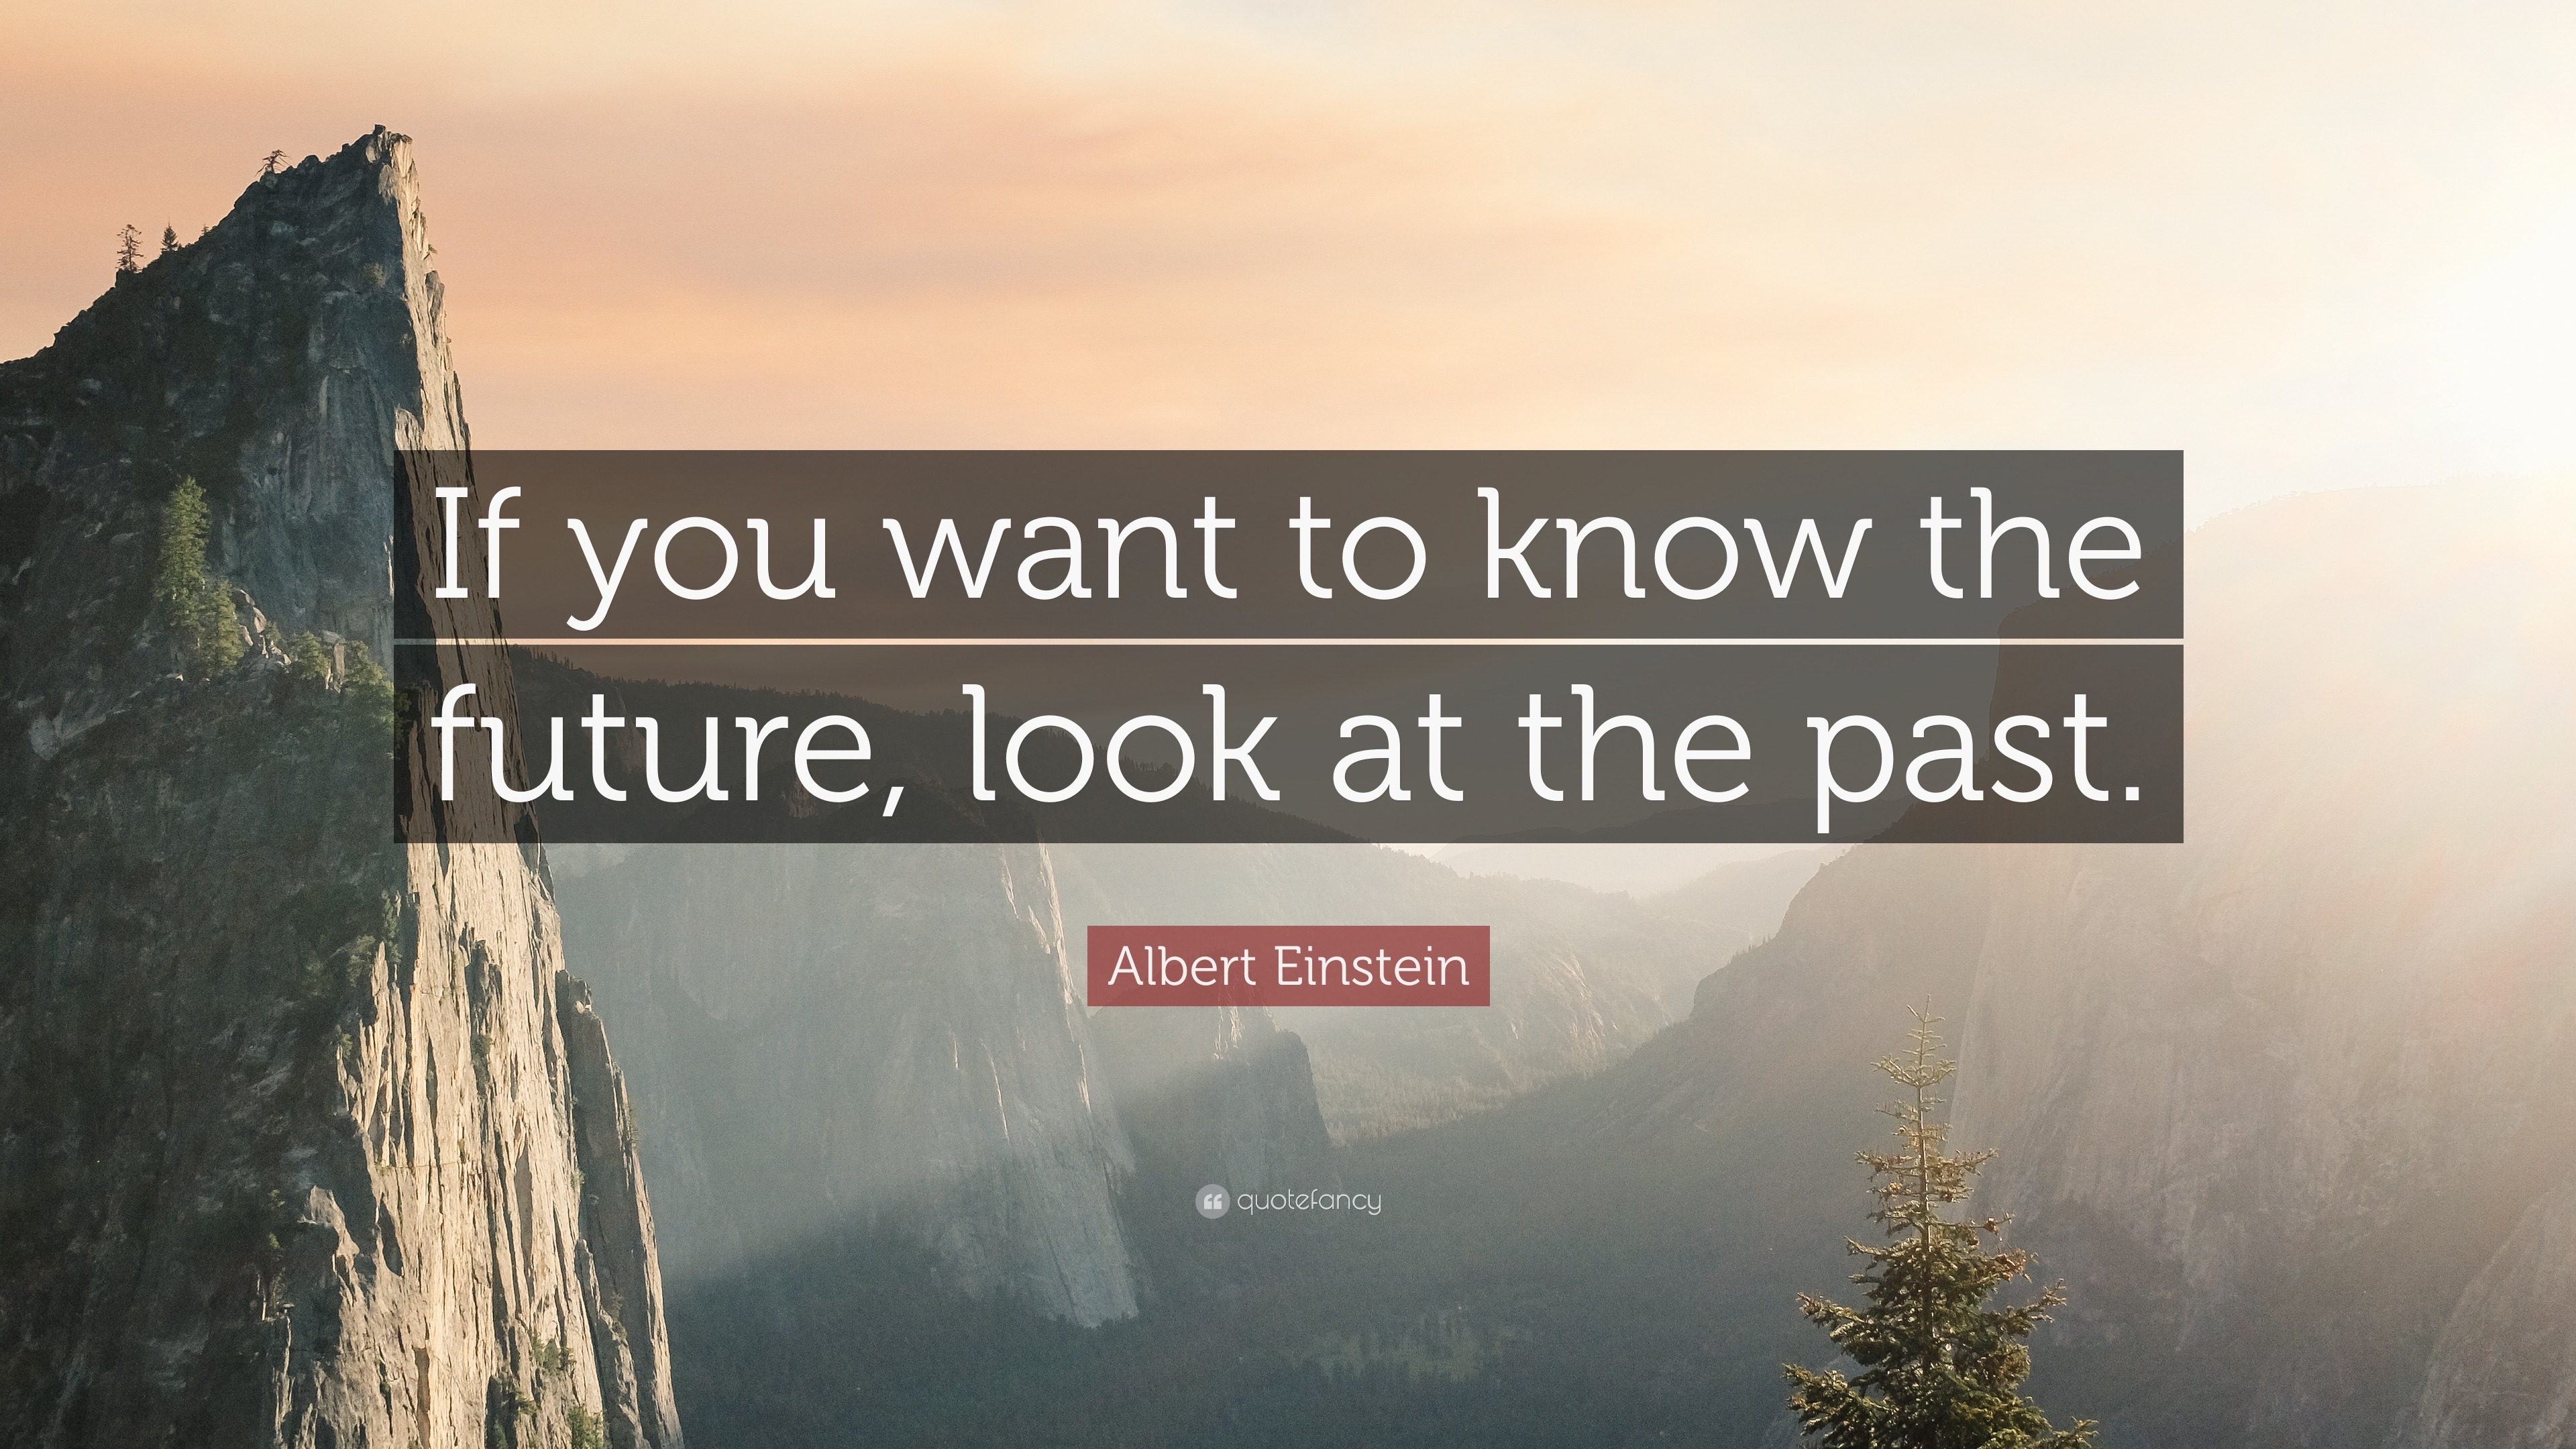 Albert Einstein Quote: “If you want to know the future, look at the past.”